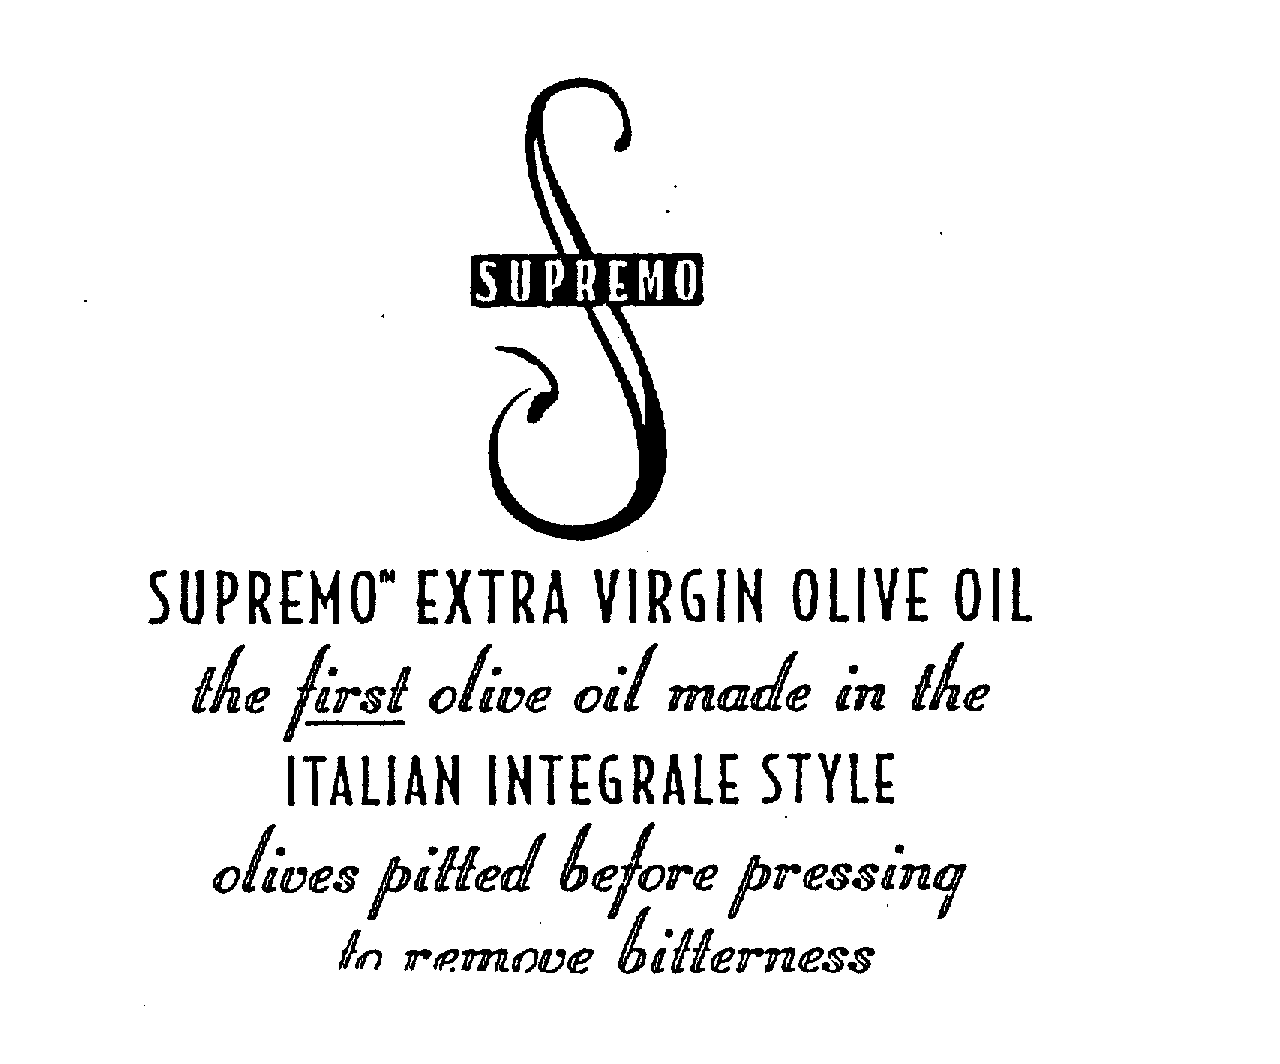  S SUPREMO SUPREMO EXTRA VIRGIN OLIVE OIL THE FIRST OLIVE OIL MADE IN THE ITALIAN INTEGRALE STYLE OLIVES PITTED BEFORE PRESSING T